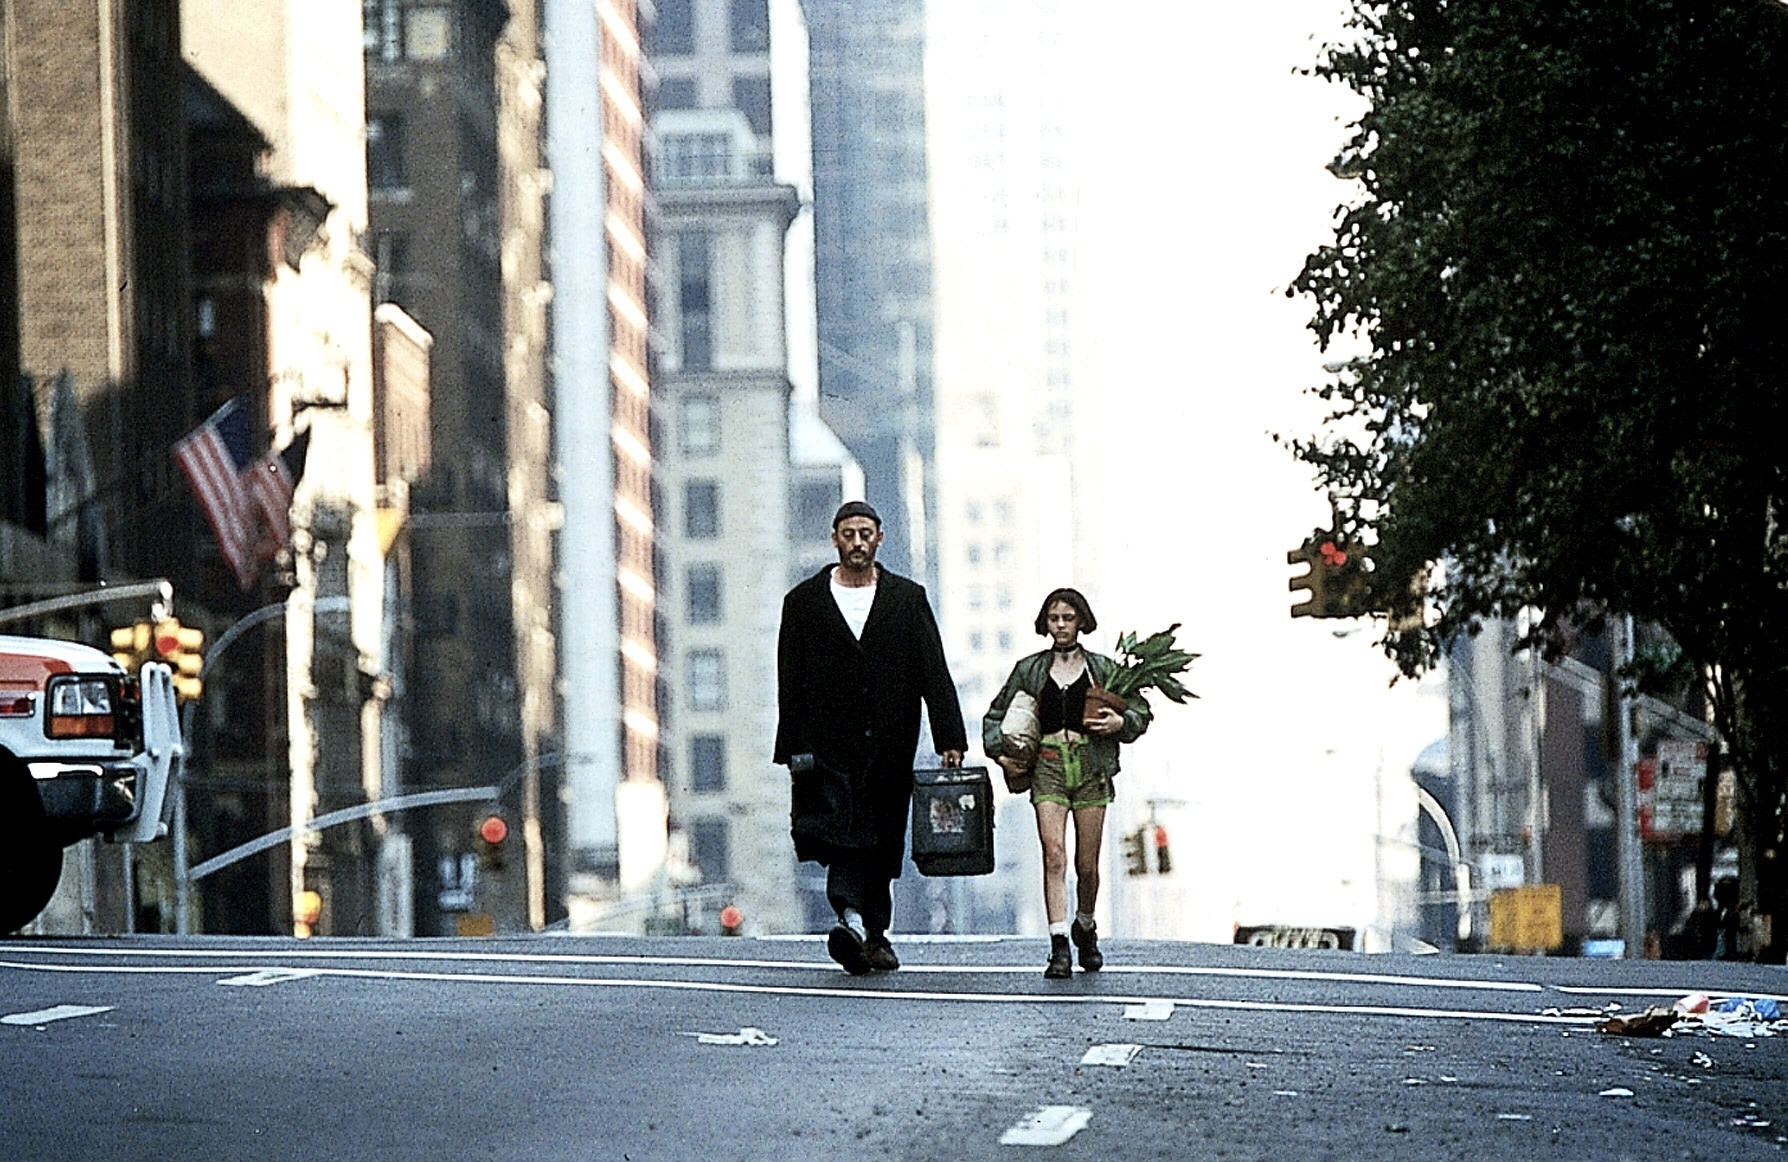 10 Most Popular And Newest Leon The Professional Wallpaper for Desktop with...